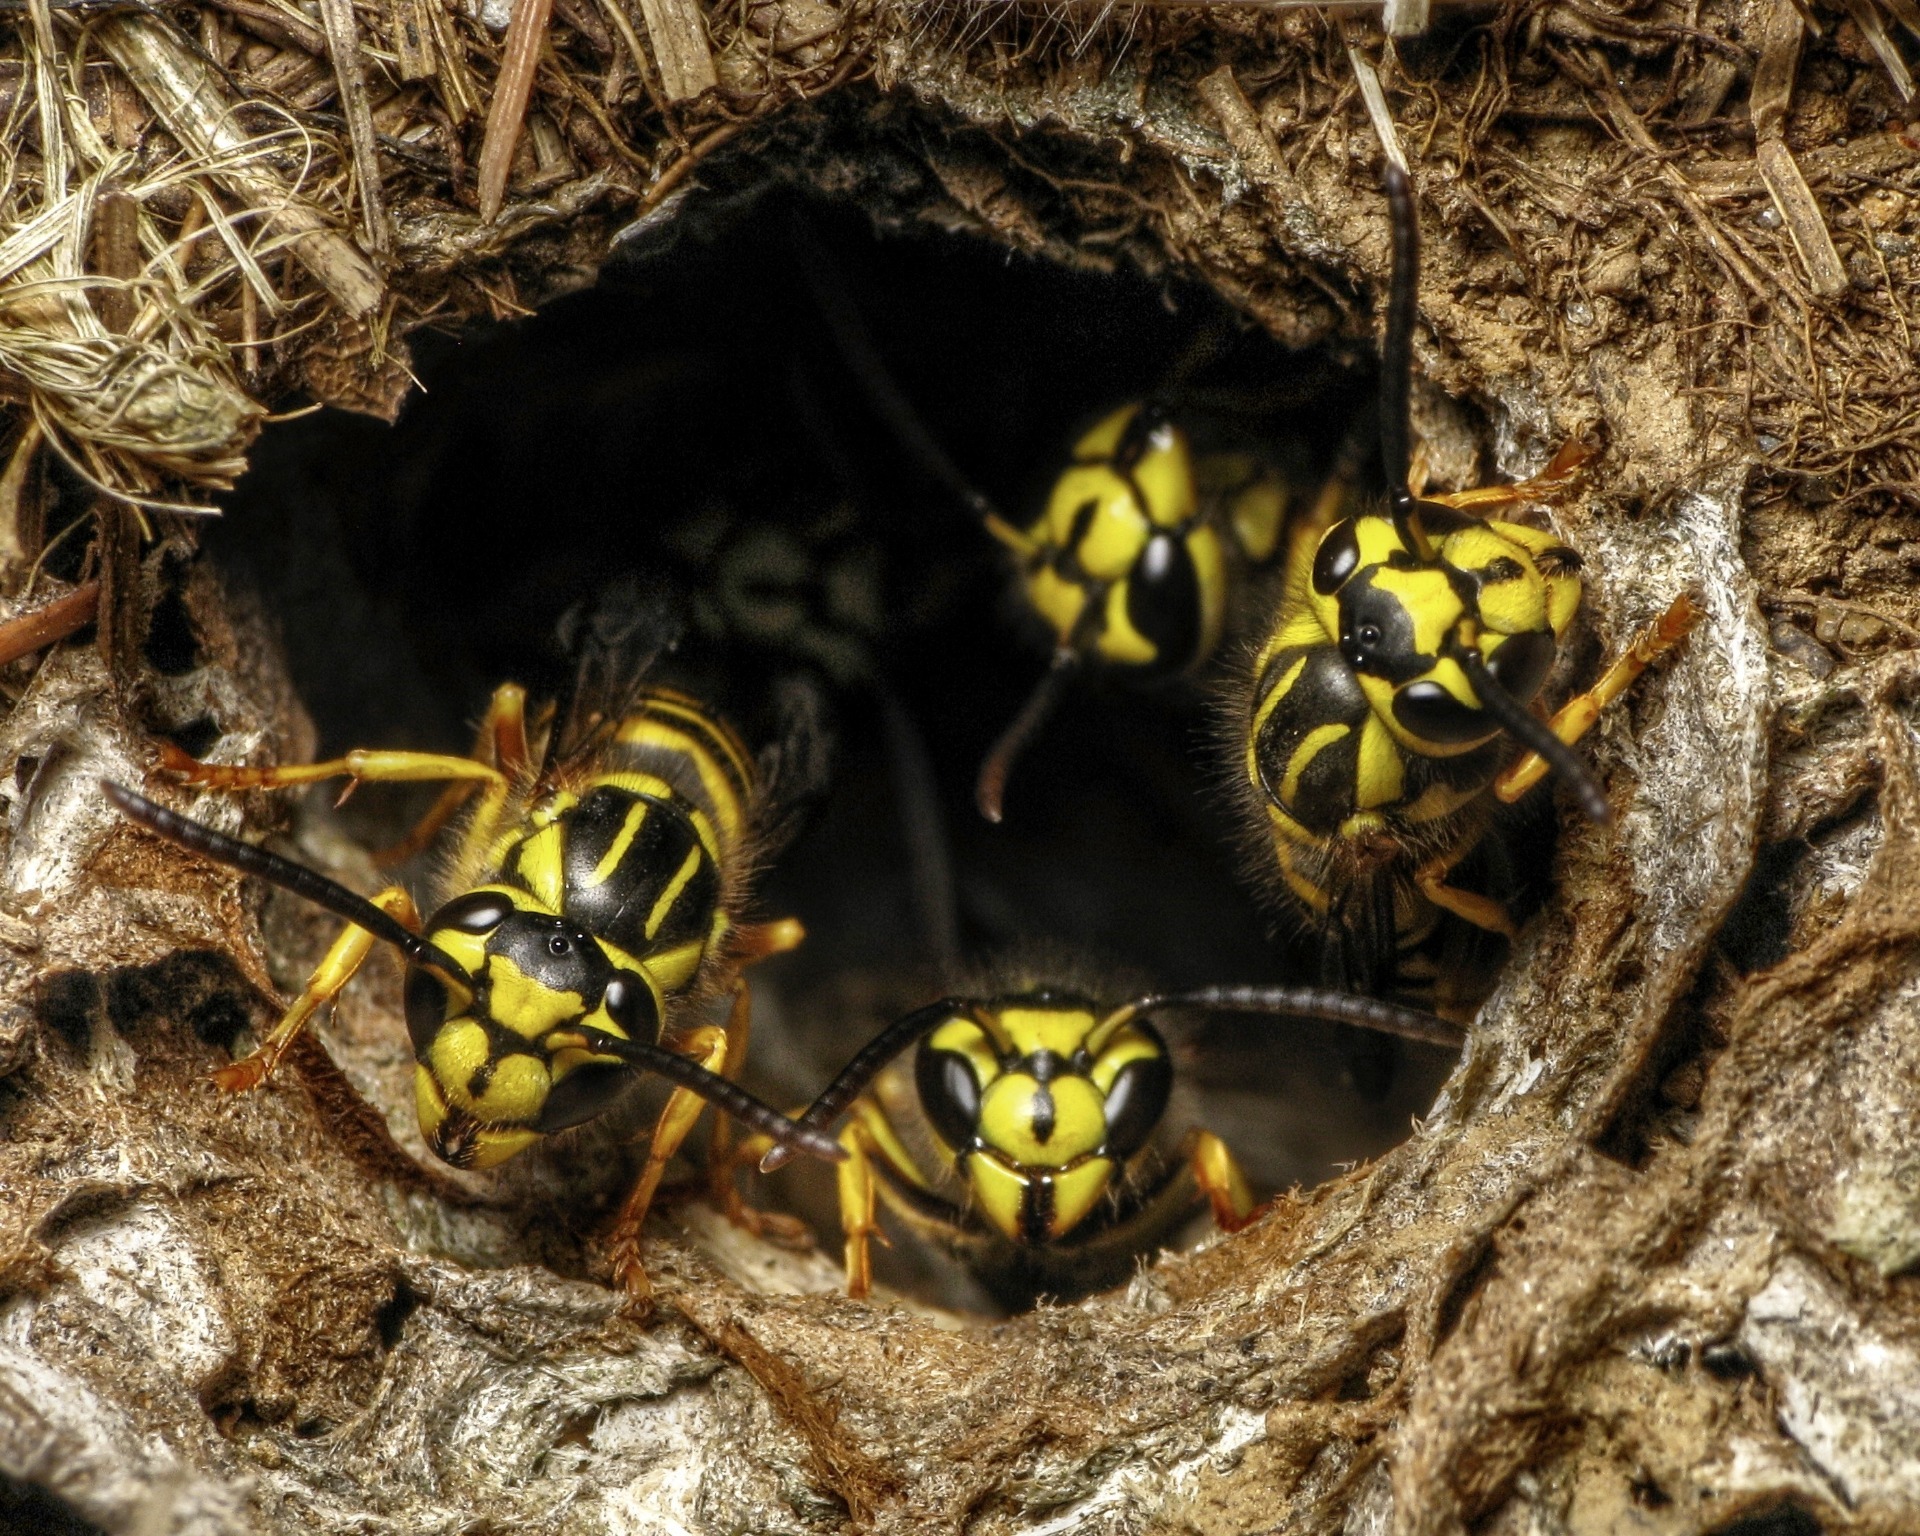 wasps coming out of the ground